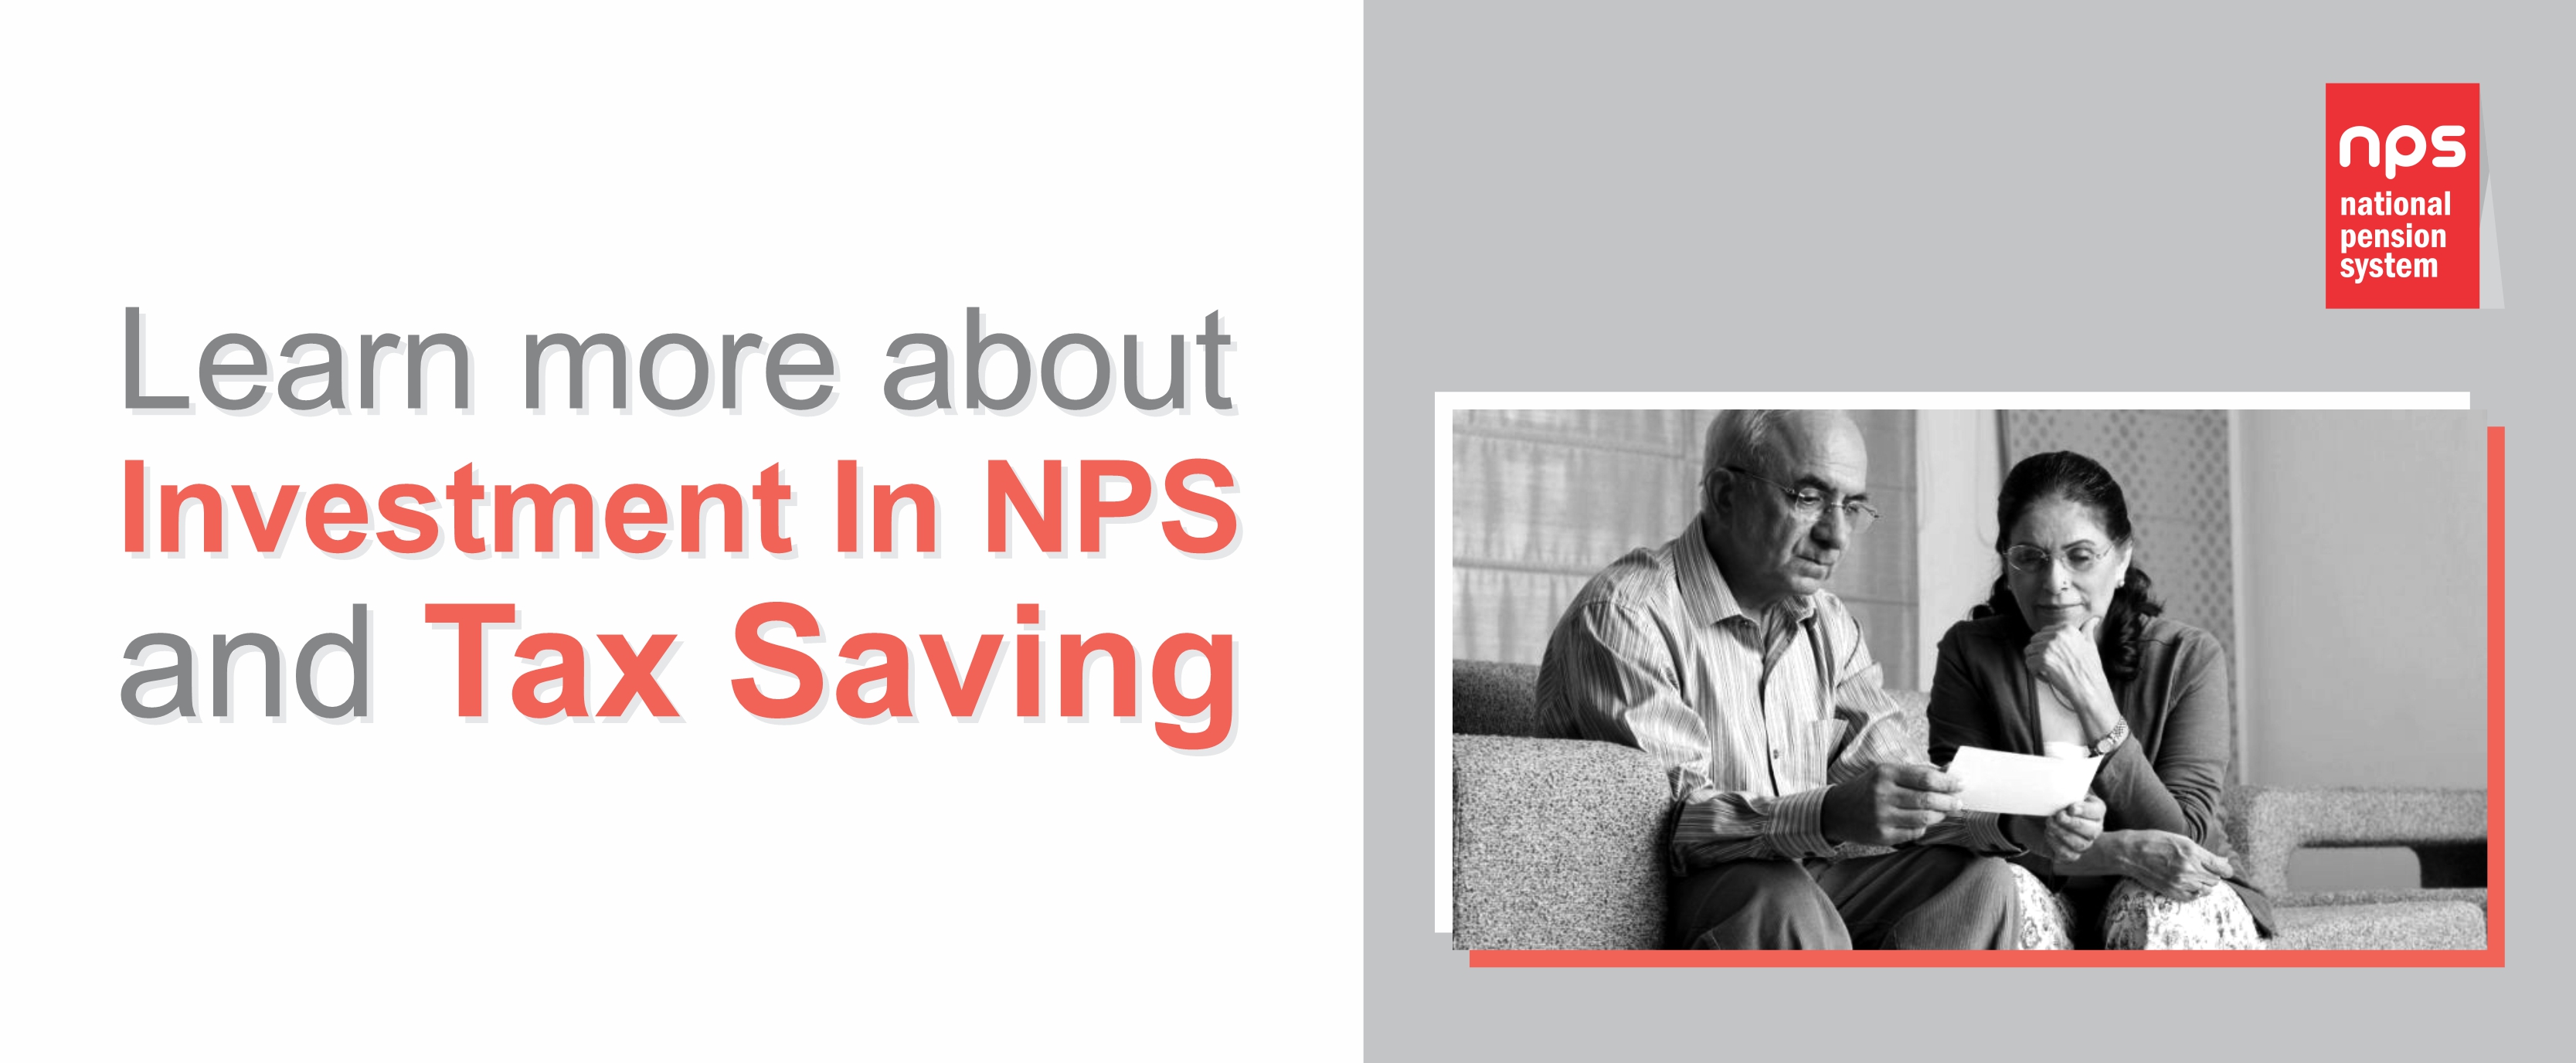 Investment in NPS and Tax Saving